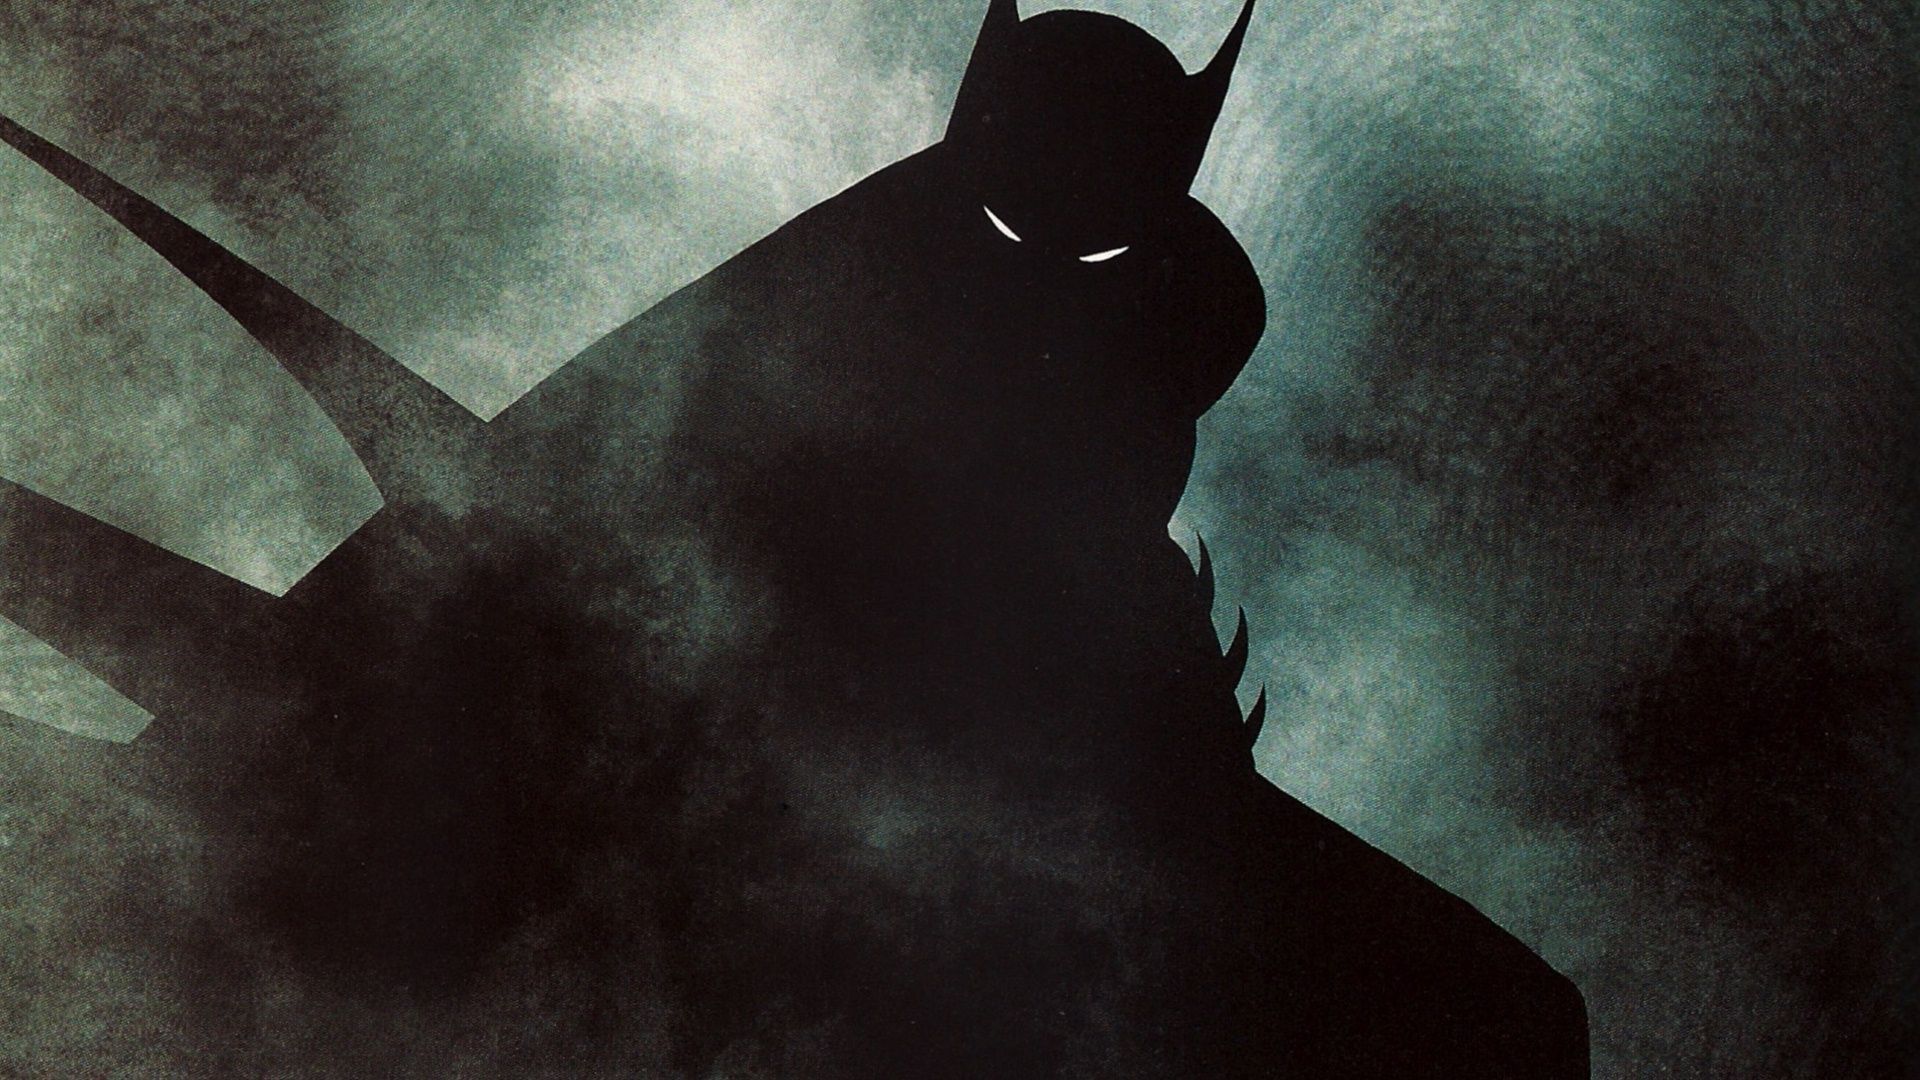 Download The Batman wallpapers for mobile phone free The Batman HD  pictures